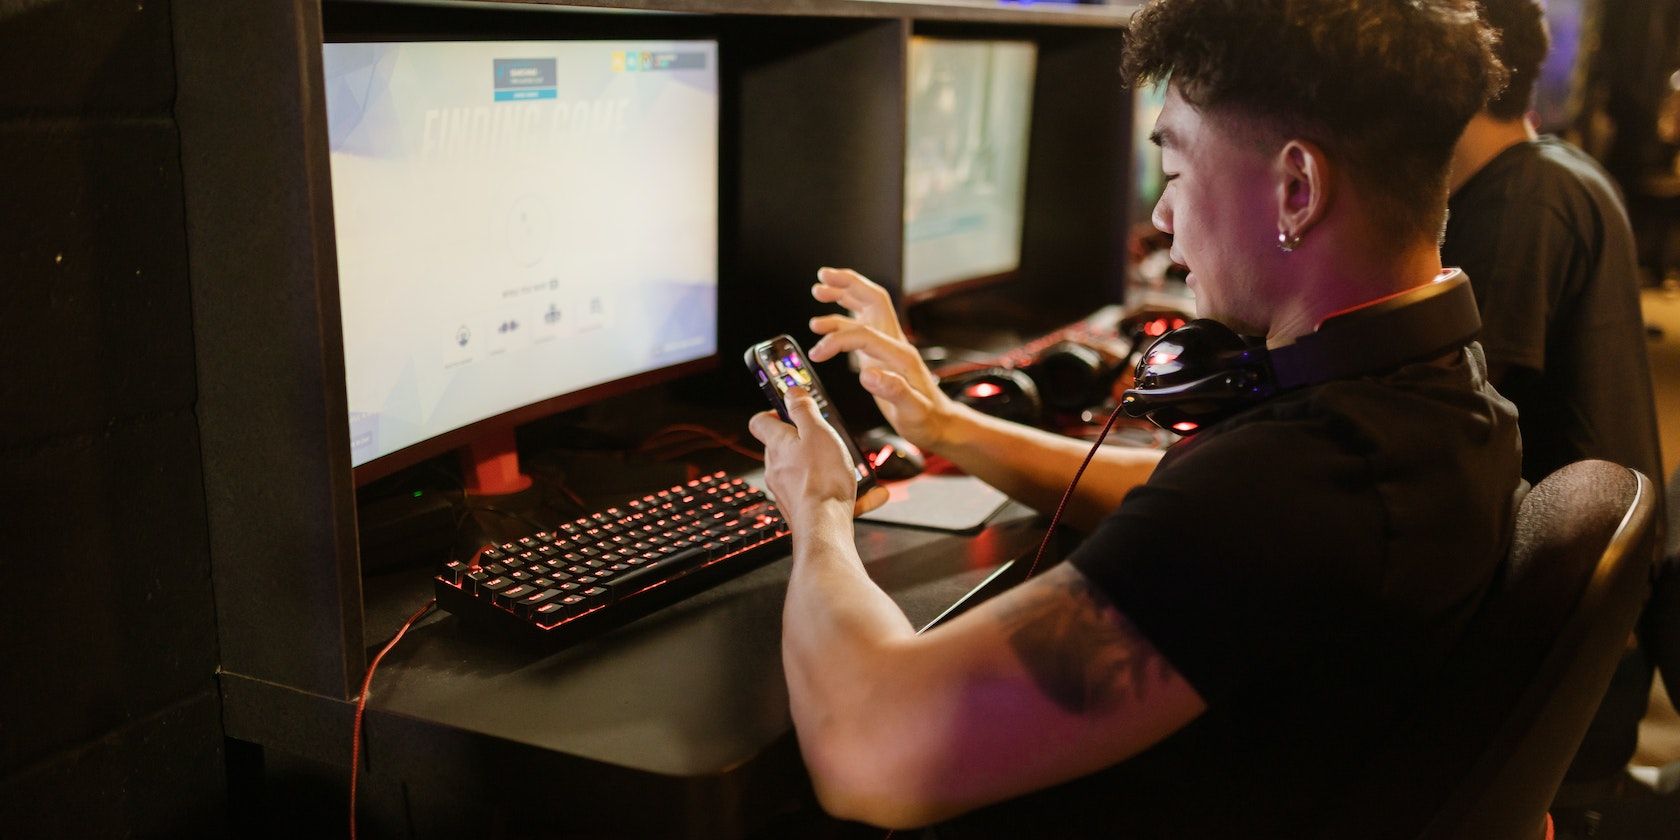 Man in Black Shirt Using a Smartphone while Sitting by the Gaming Computer